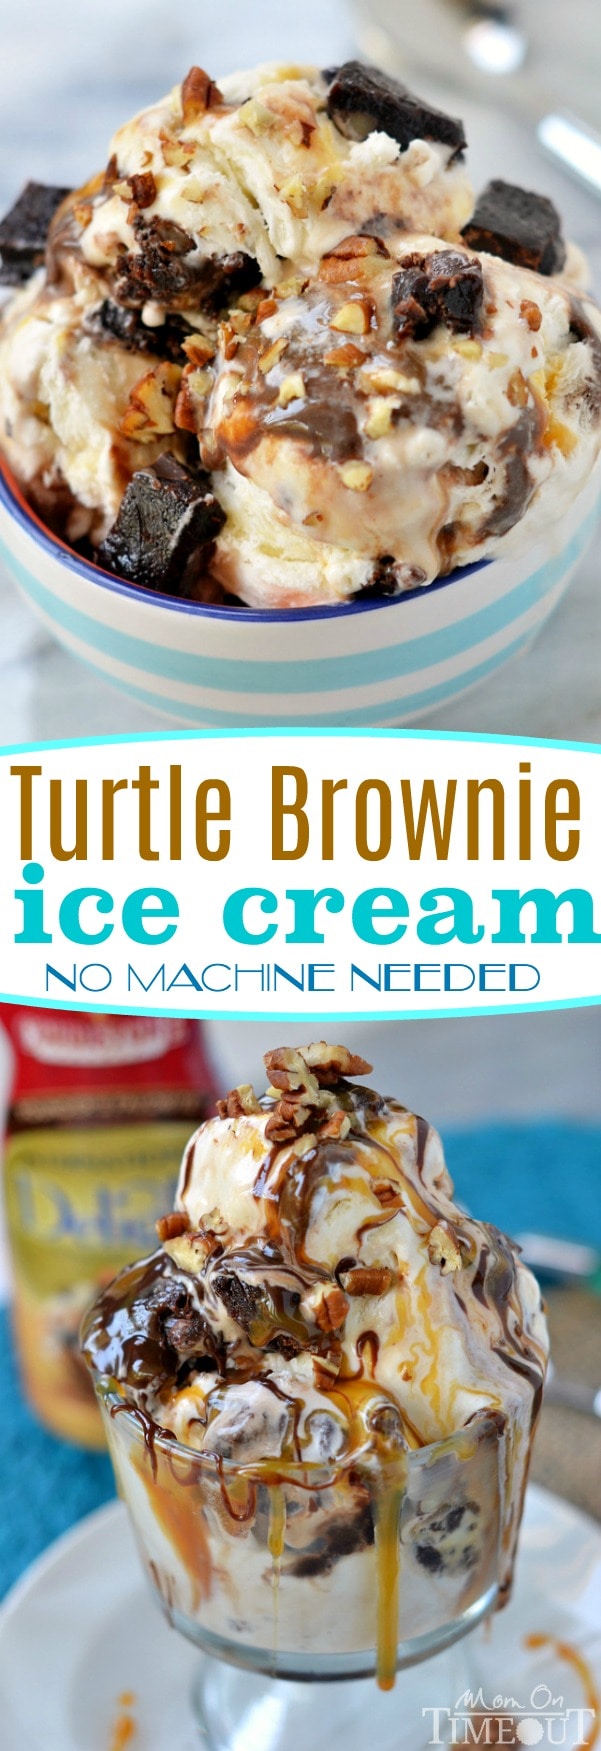 Satisfy those chocolate cravings and beat the heat with this totally decadent Turtle Brownie Ice Cream - no machine needed! // Mom On Timeout